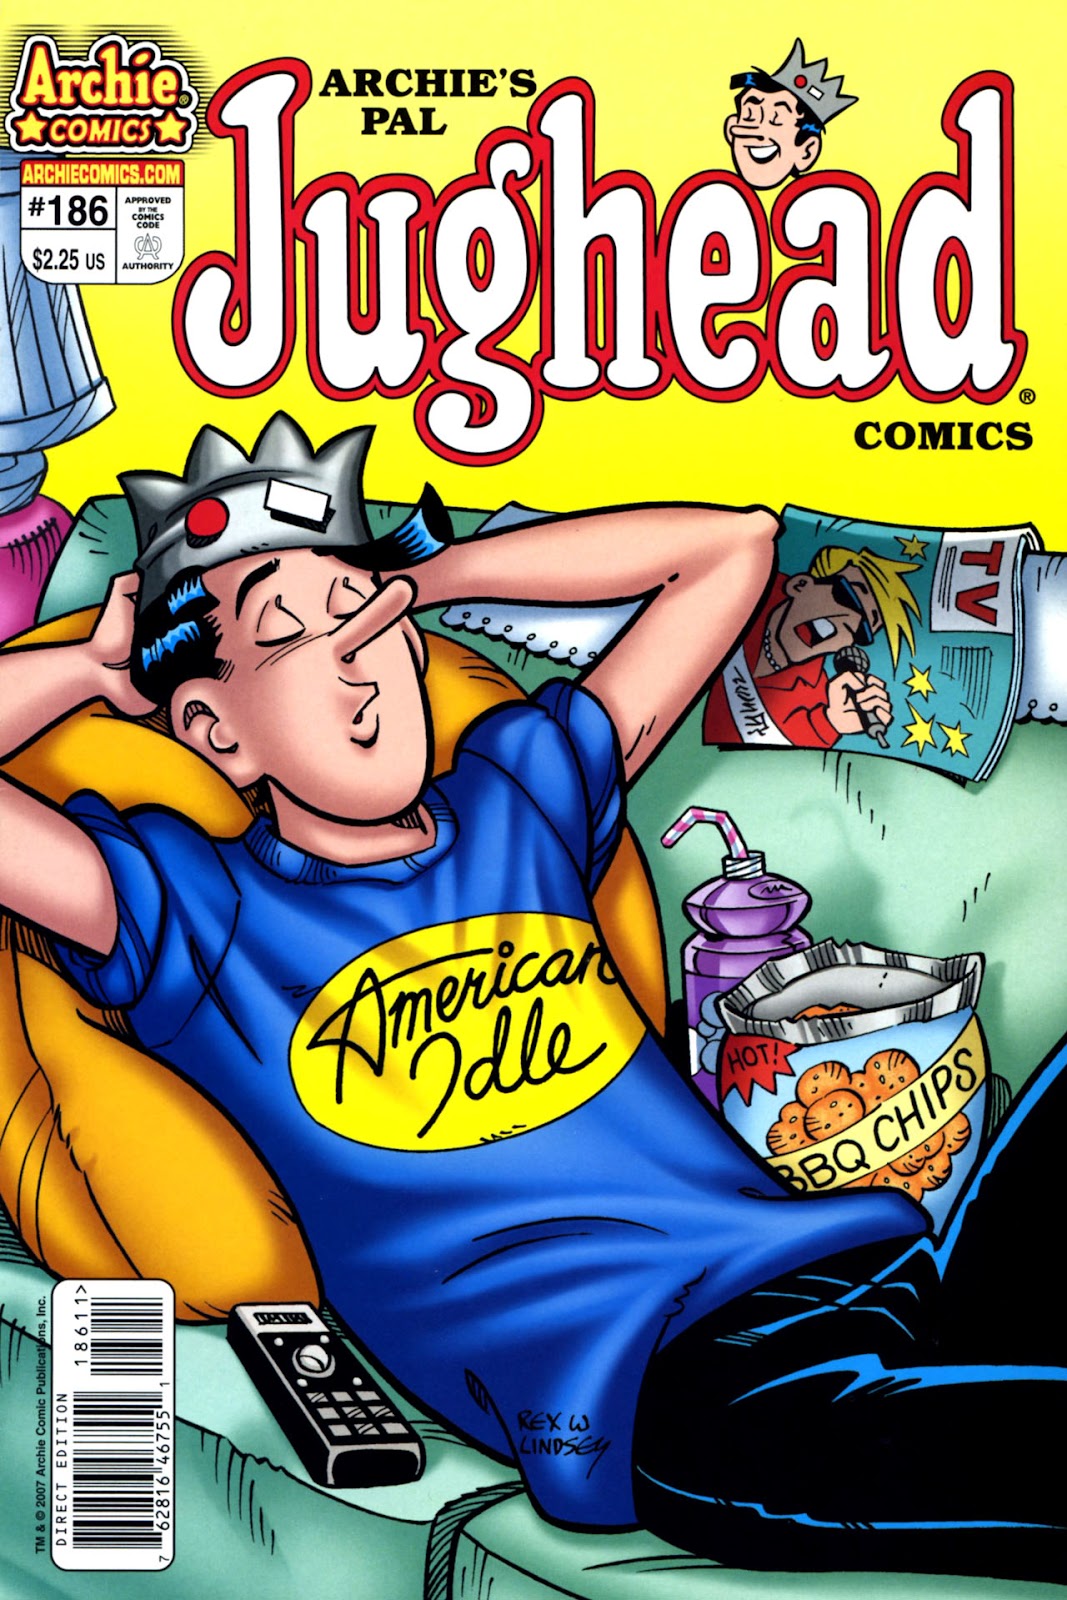 Archie's Pal Jughead Comics issue 186 - Page 1